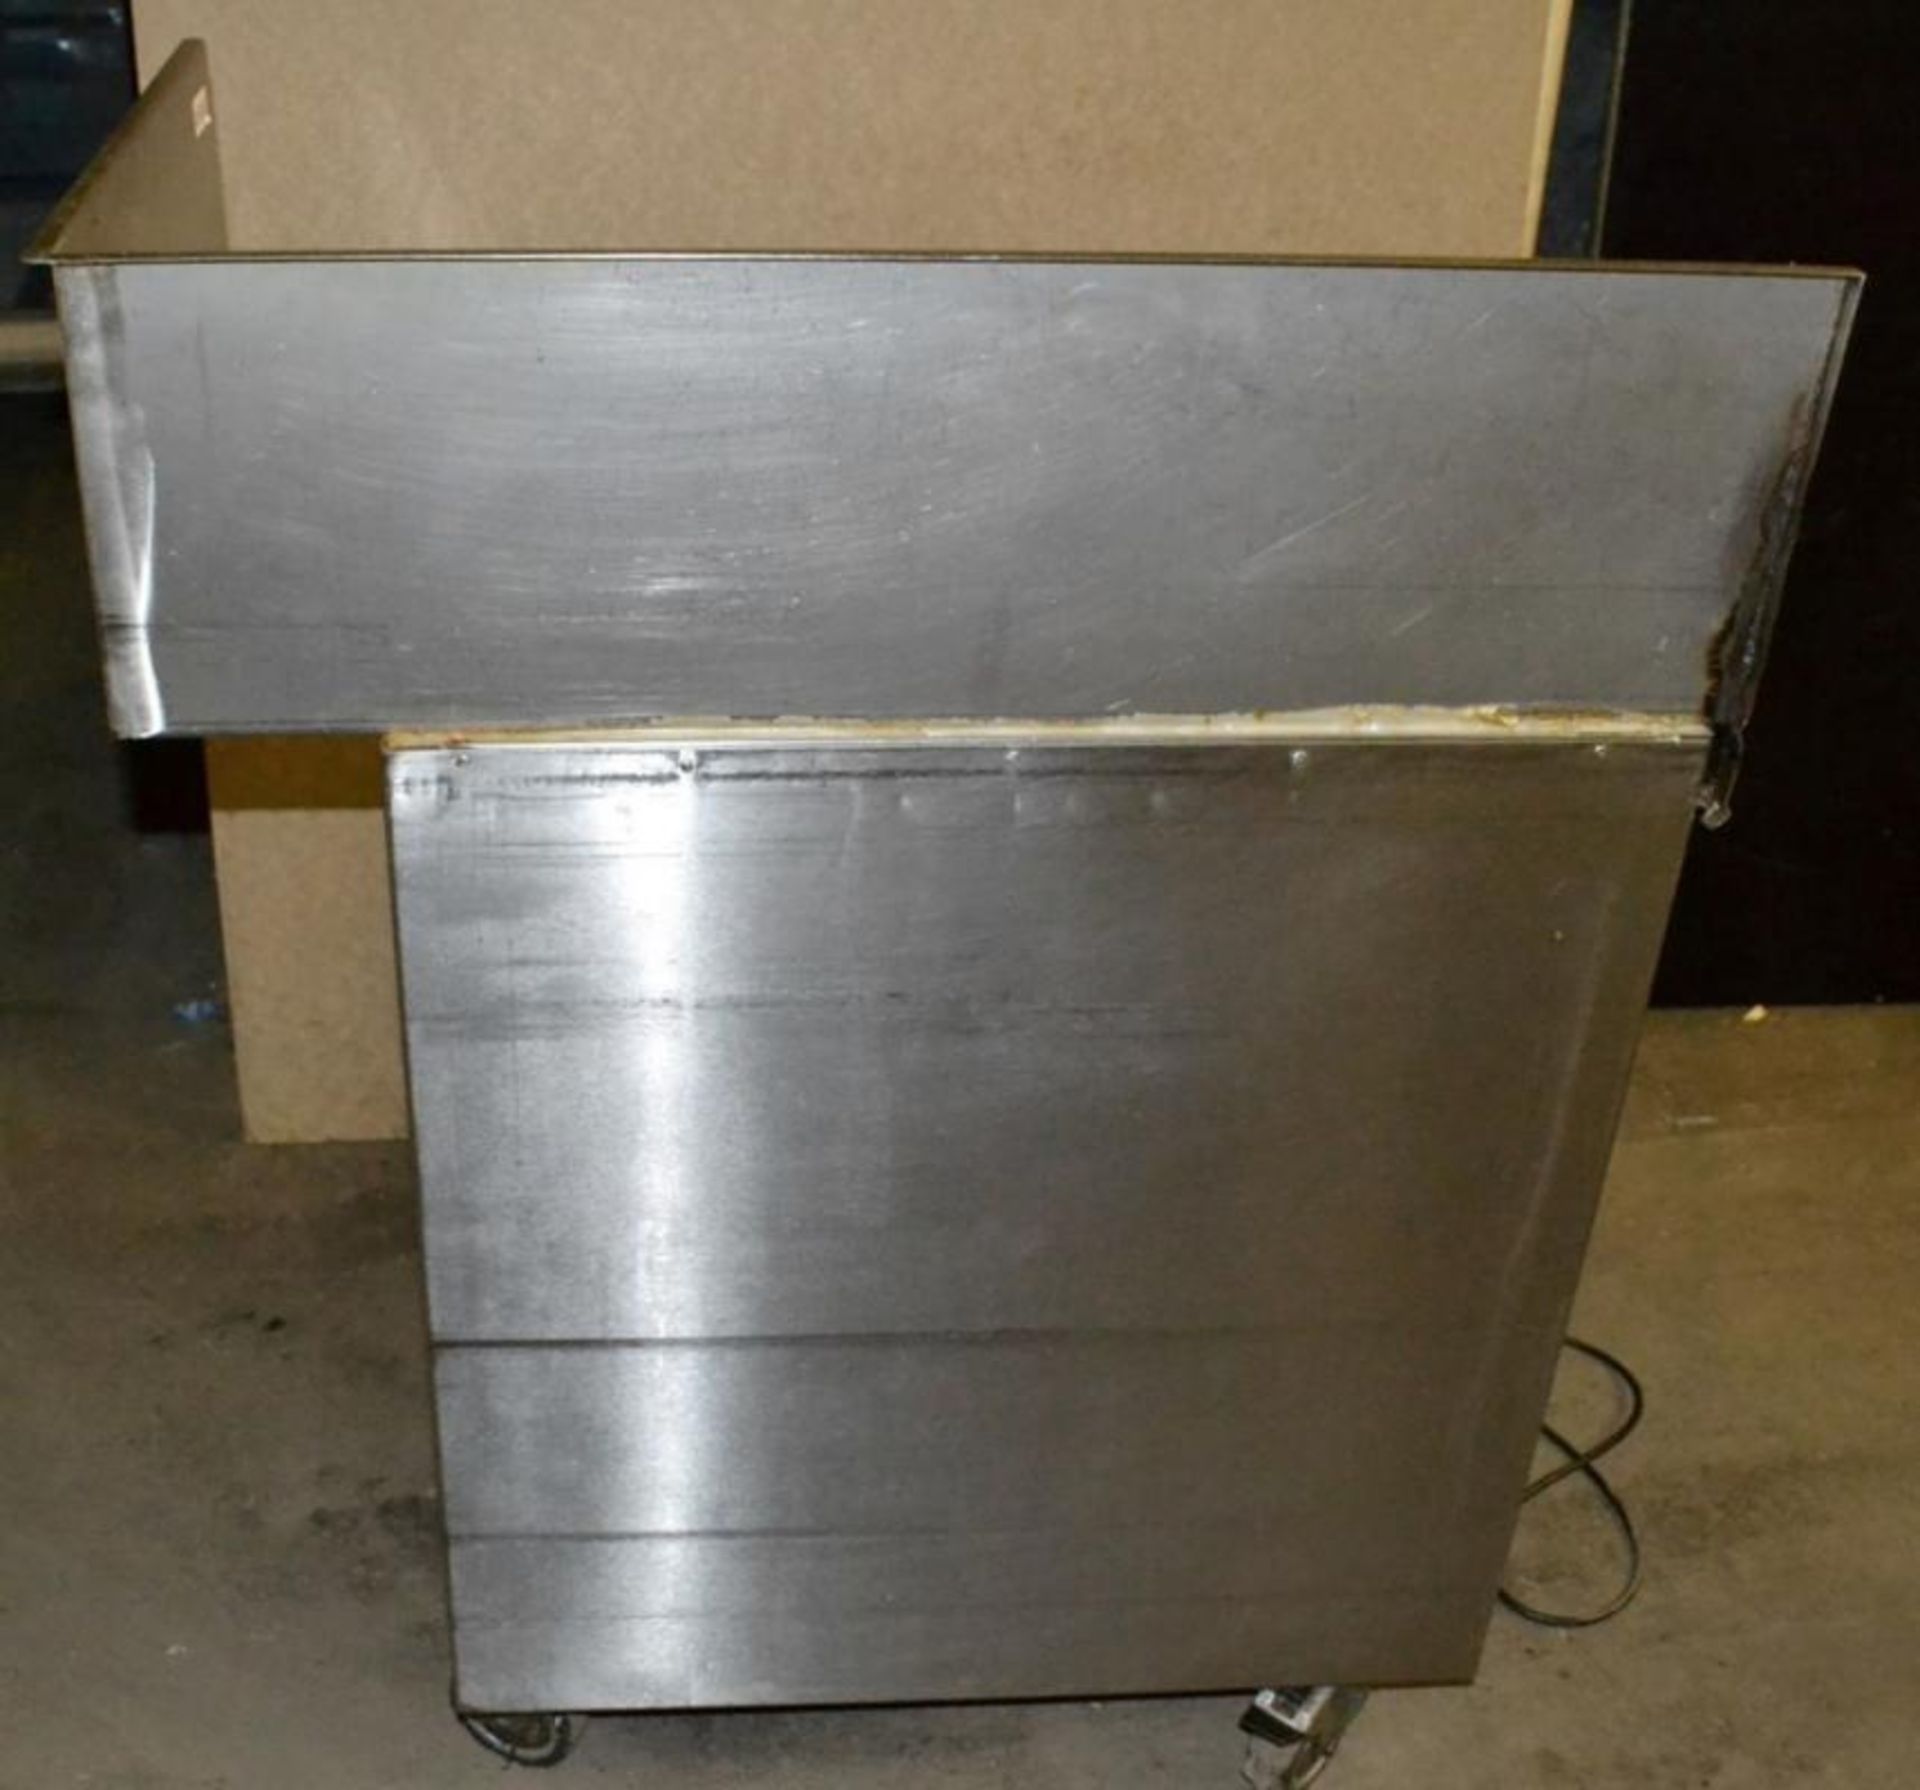 1 x Stainless Steel Commercial Hot Cupboard With Corner Spashback - Dimensions: 85 x 50 x H110cm - - Image 3 of 4